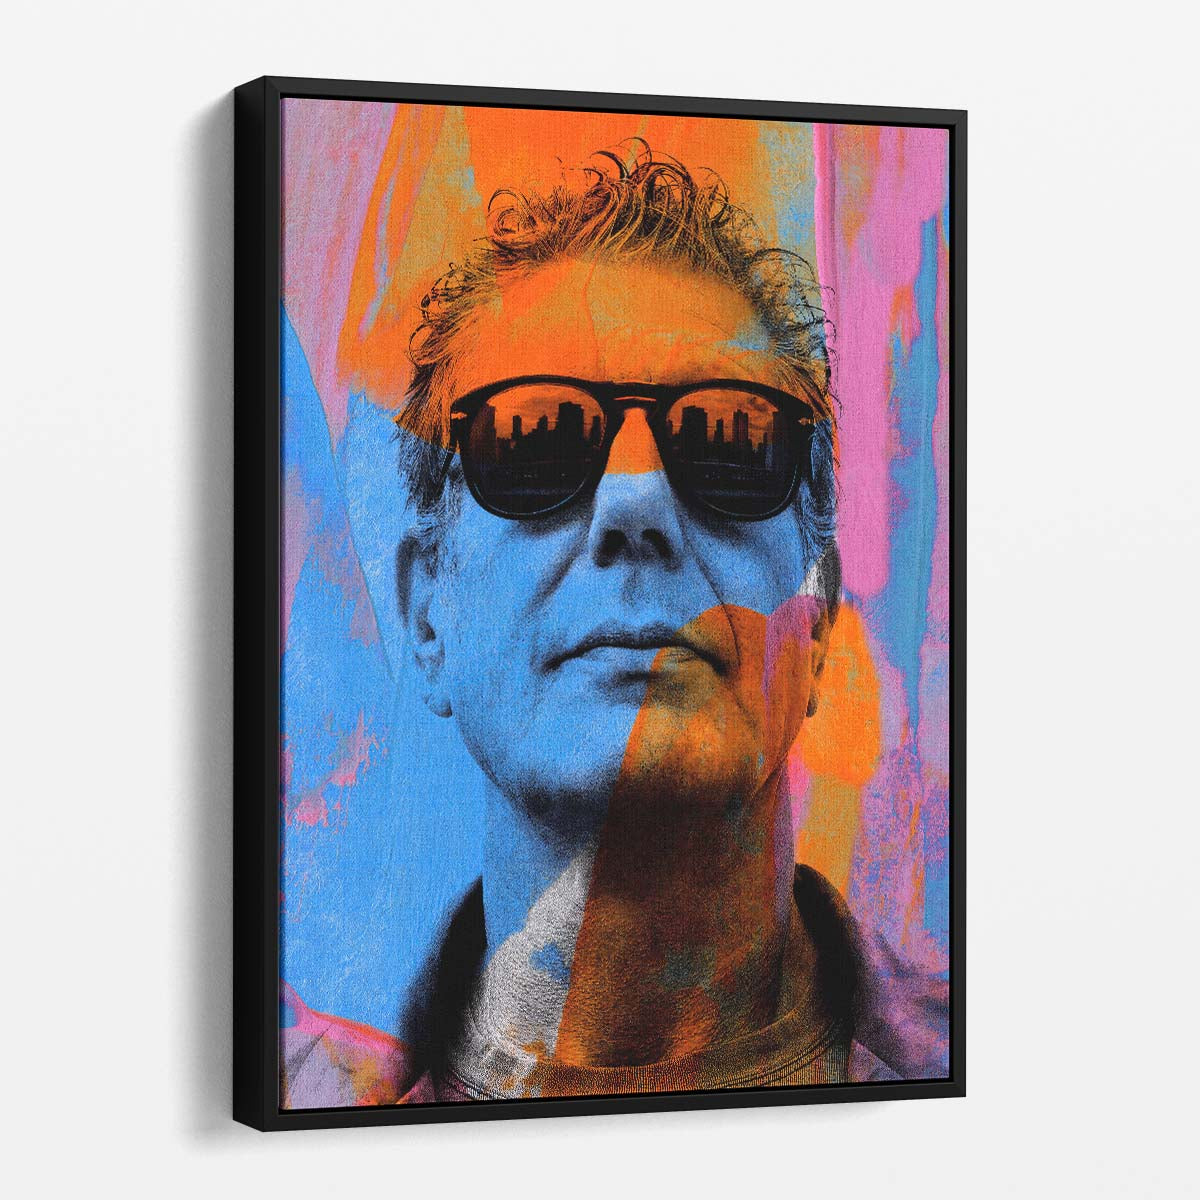 Anthony Bourdain Bright Colors Wall Art by Luxuriance Designs. Made in USA.